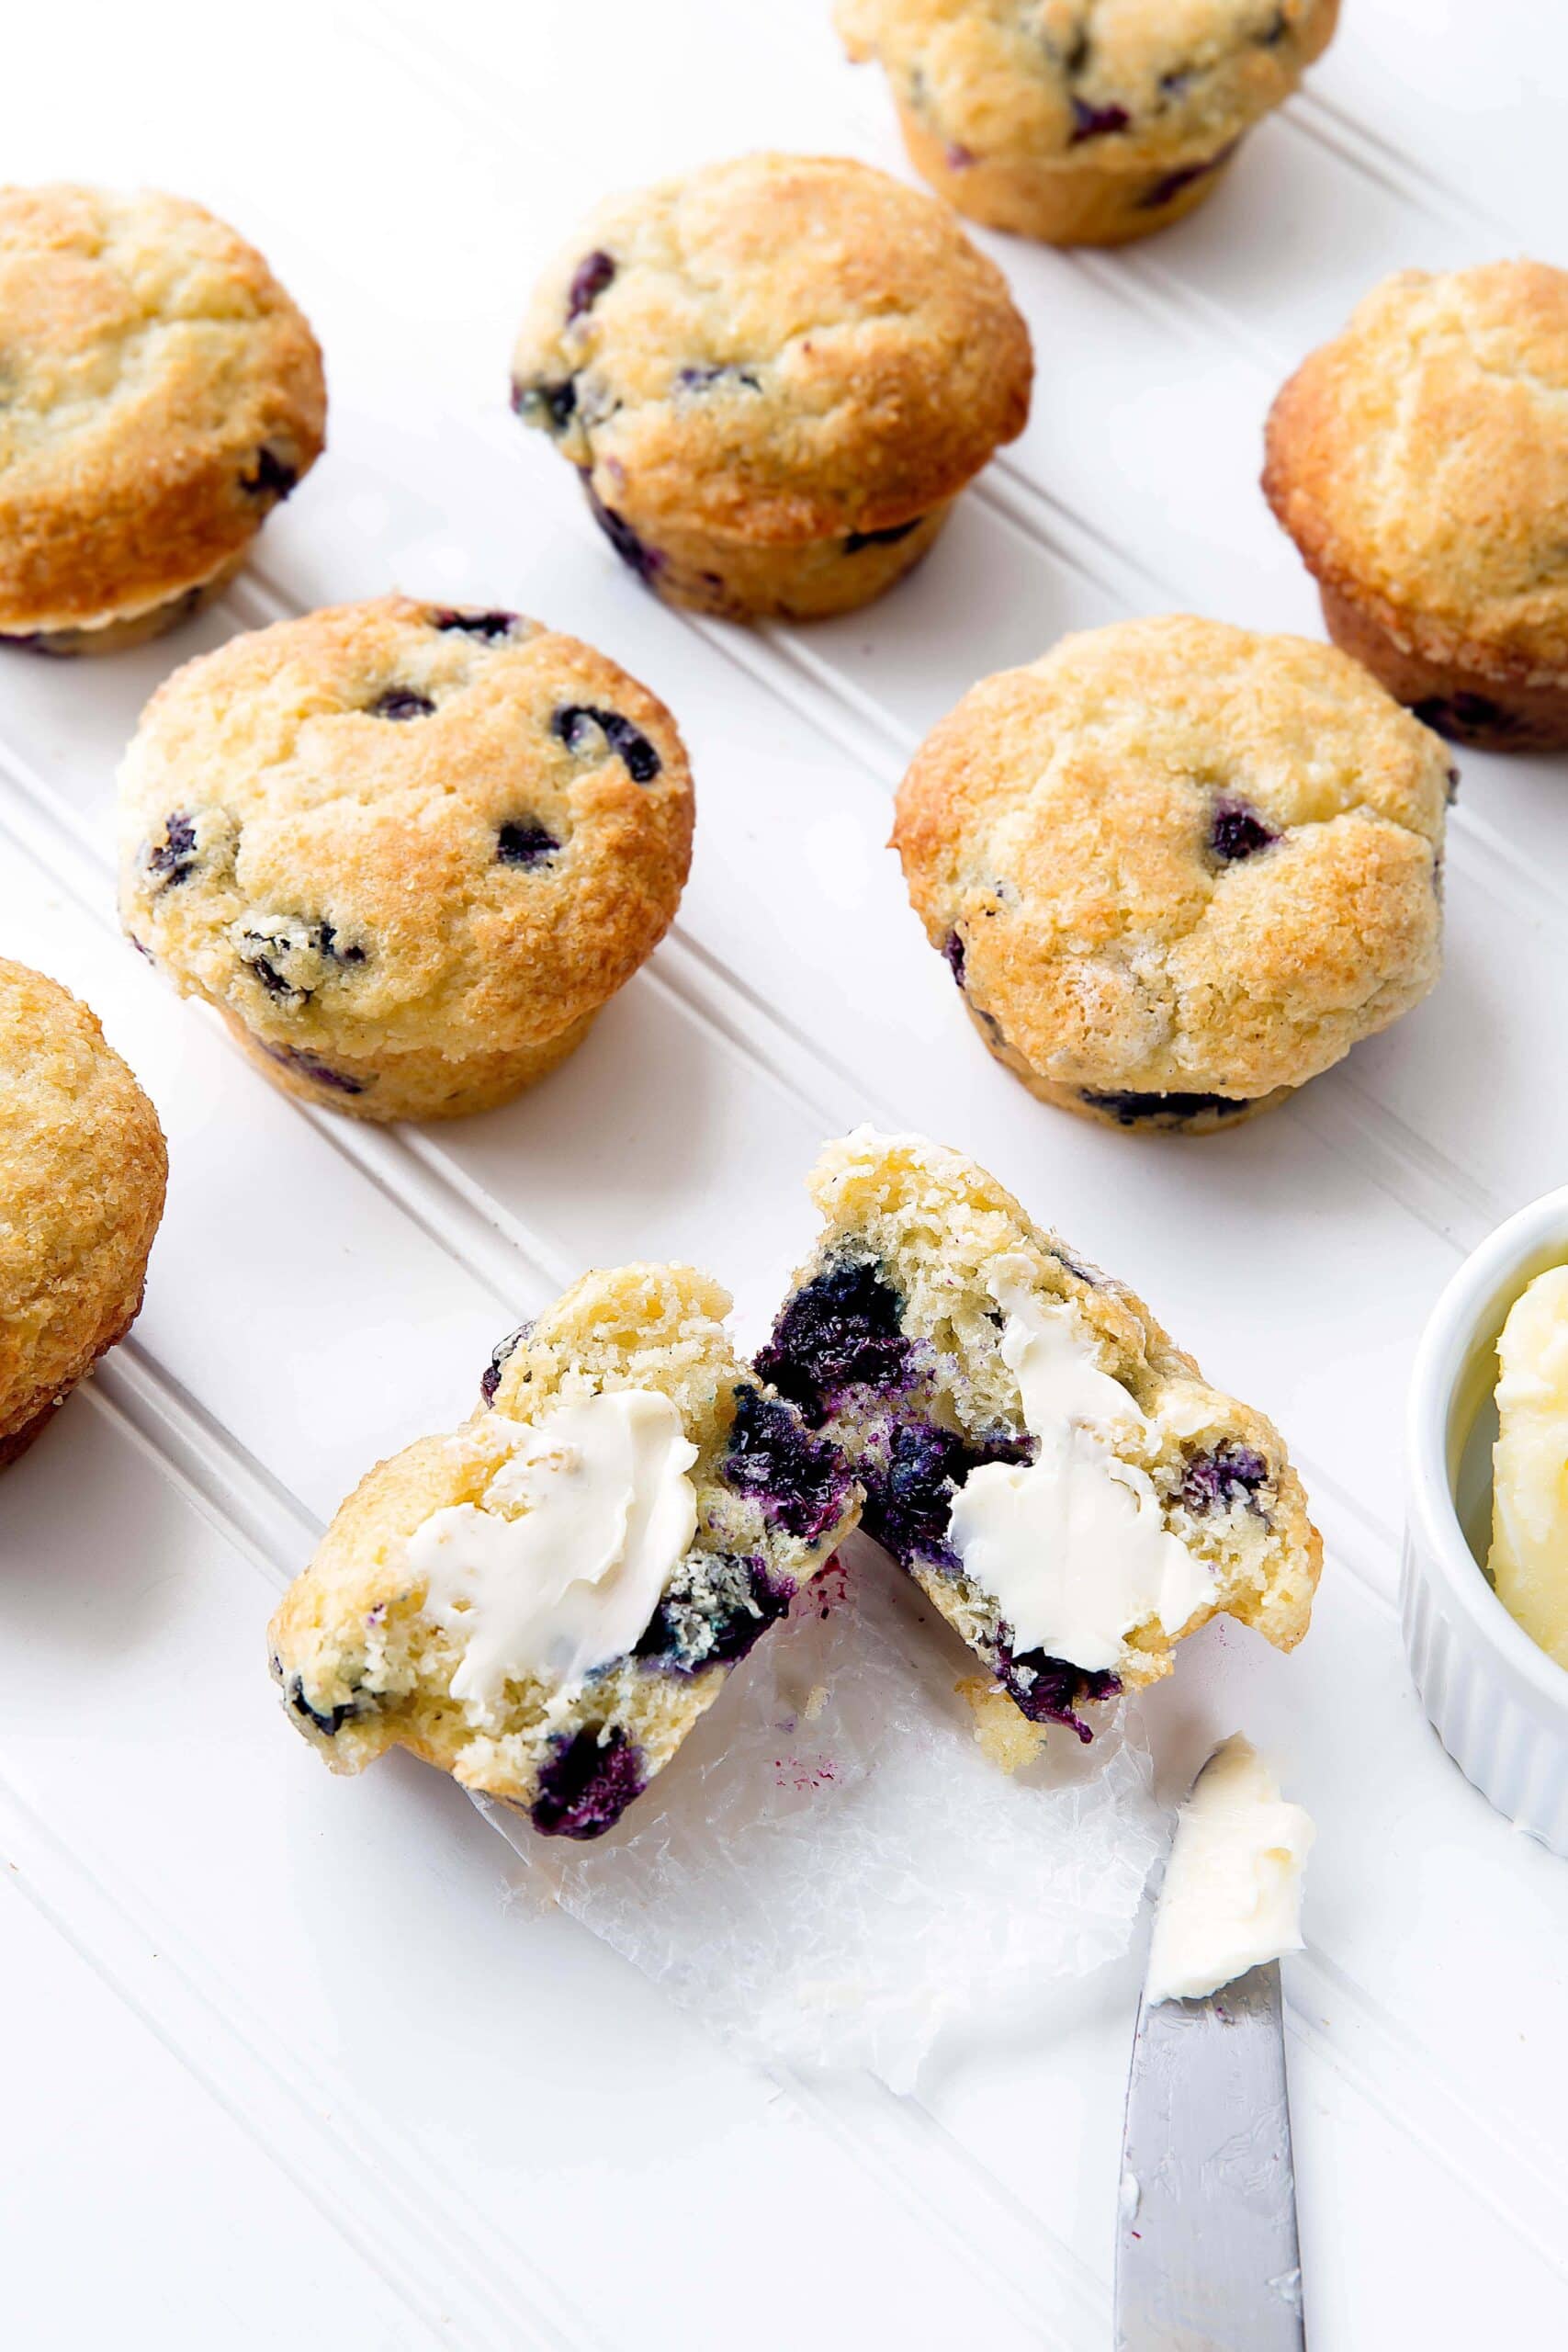 Sky high Bakery Style Blueberry Muffins are soft, fluffy, and loaded with juicy blueberries. One bite and you'll agree that they're the best blueberry muffin you've ever had!